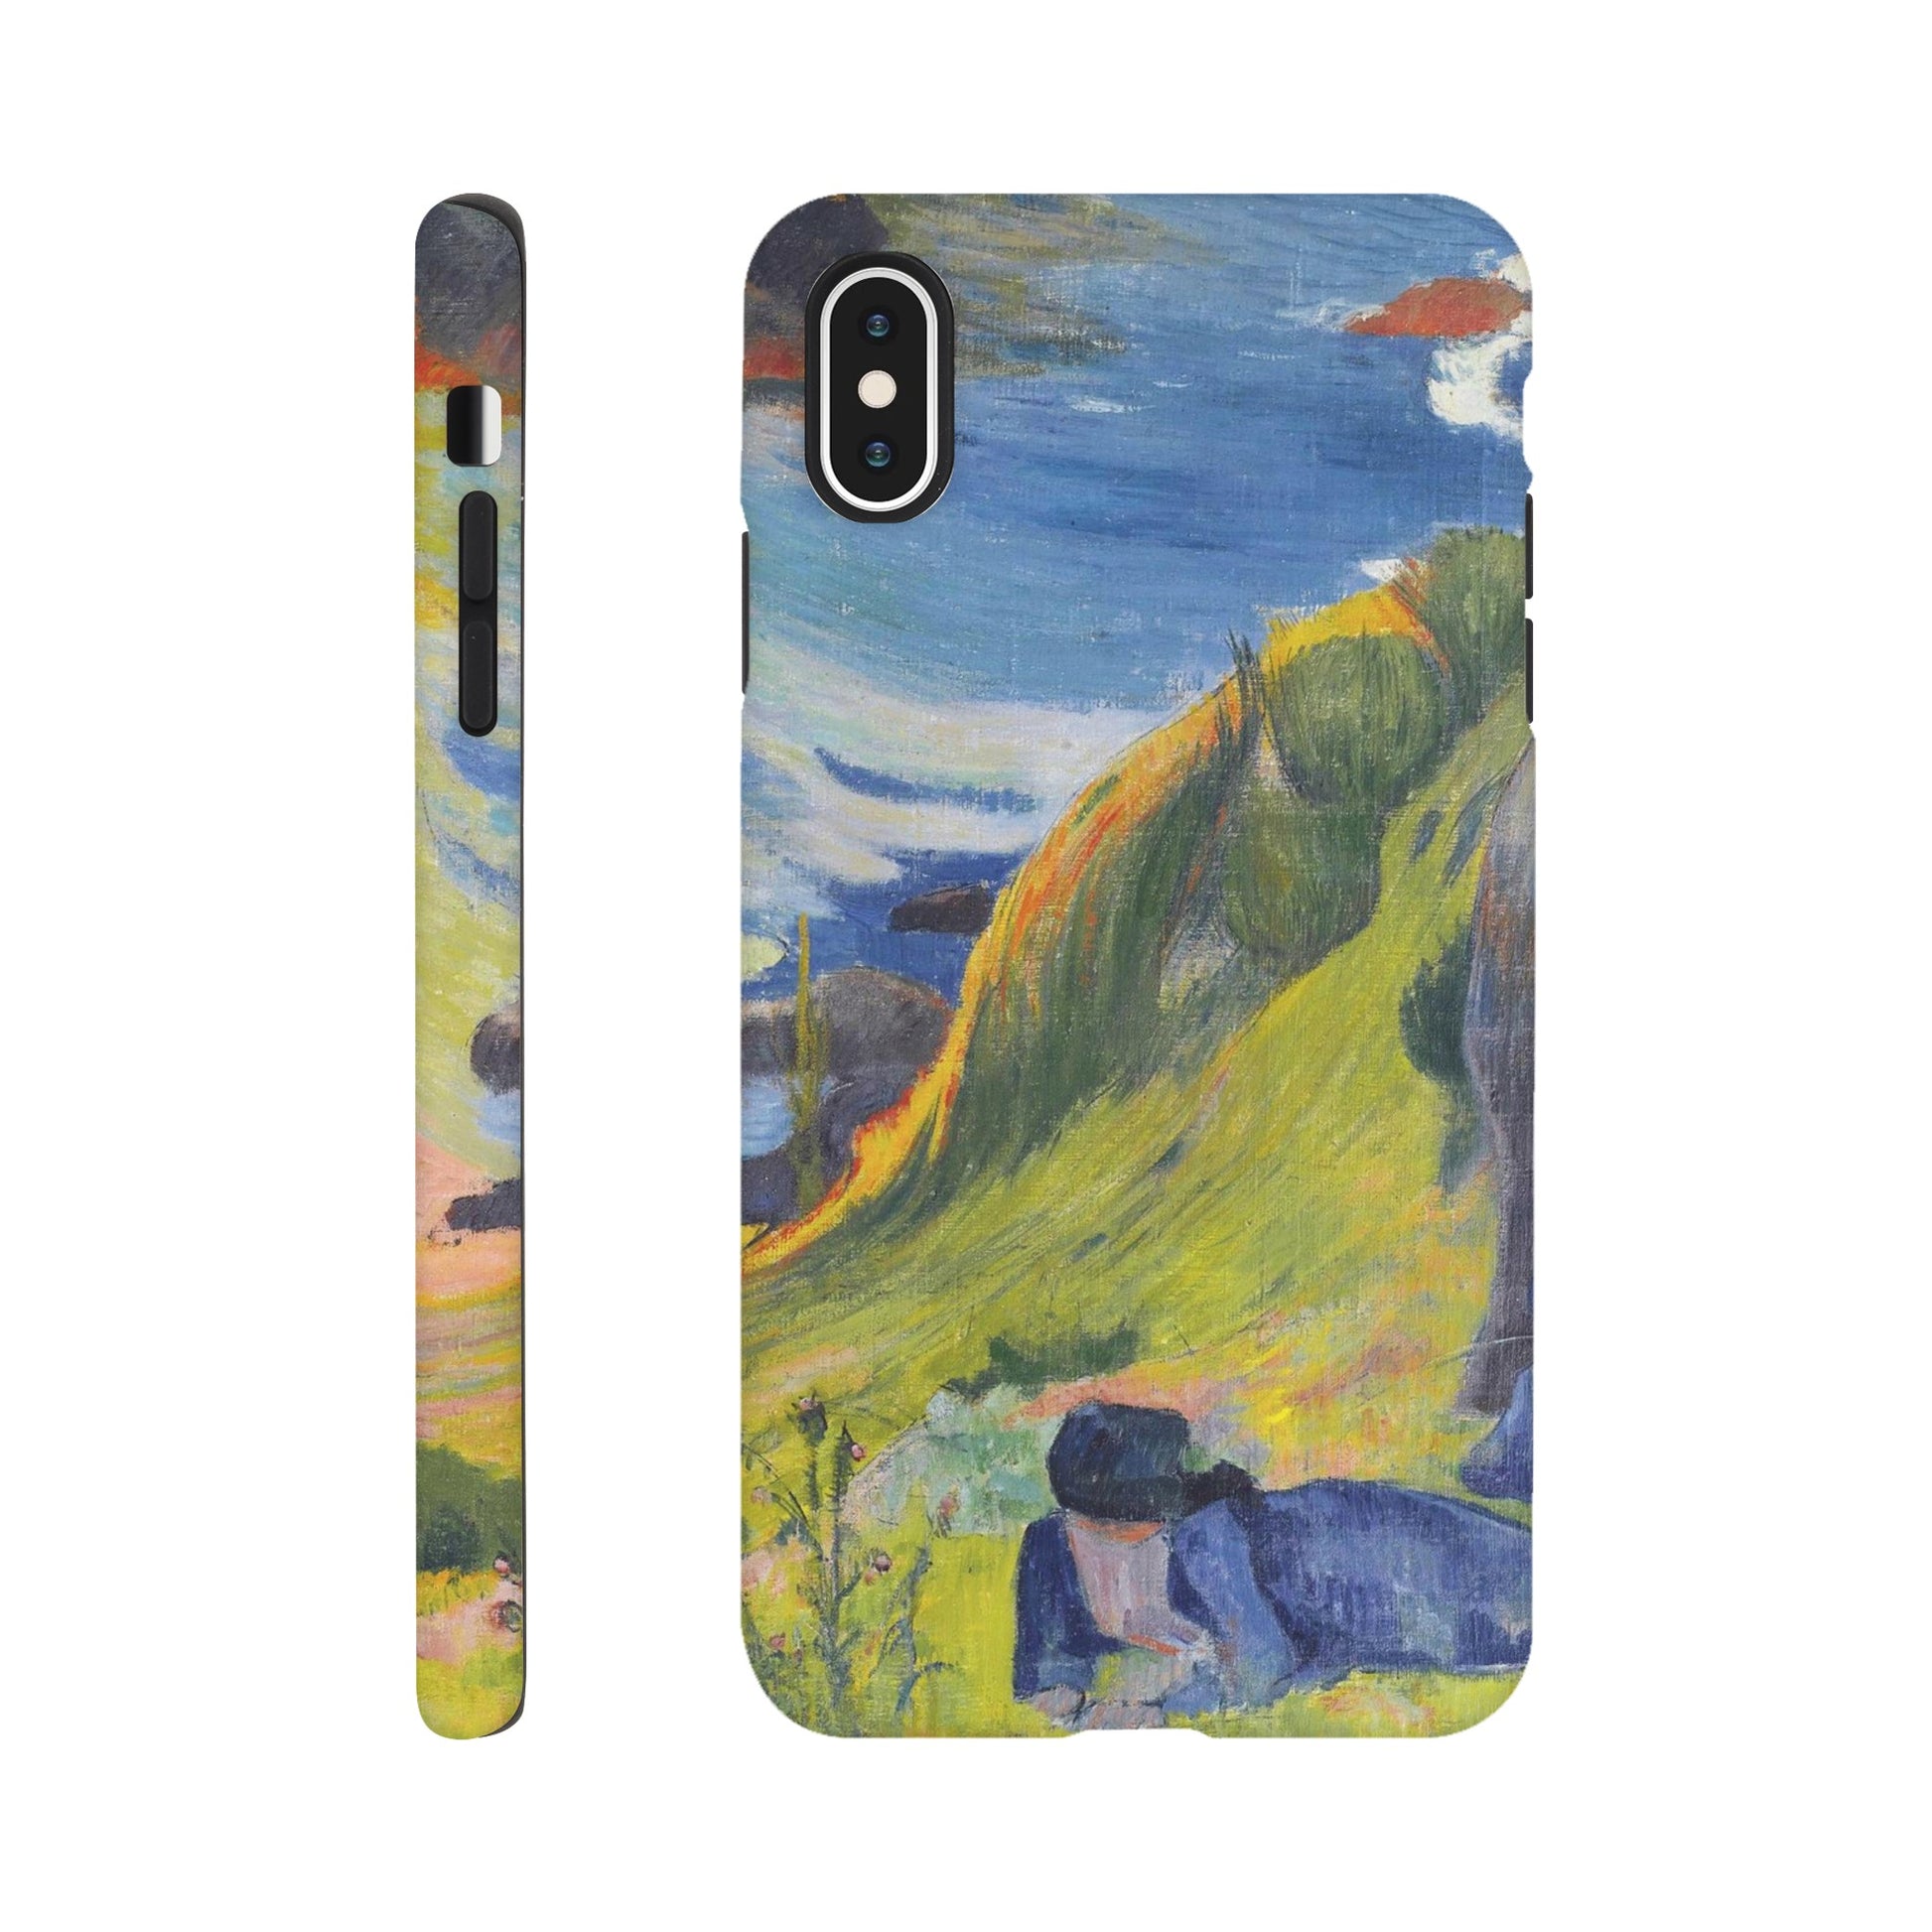 a phone case with a painting of a mountain scene